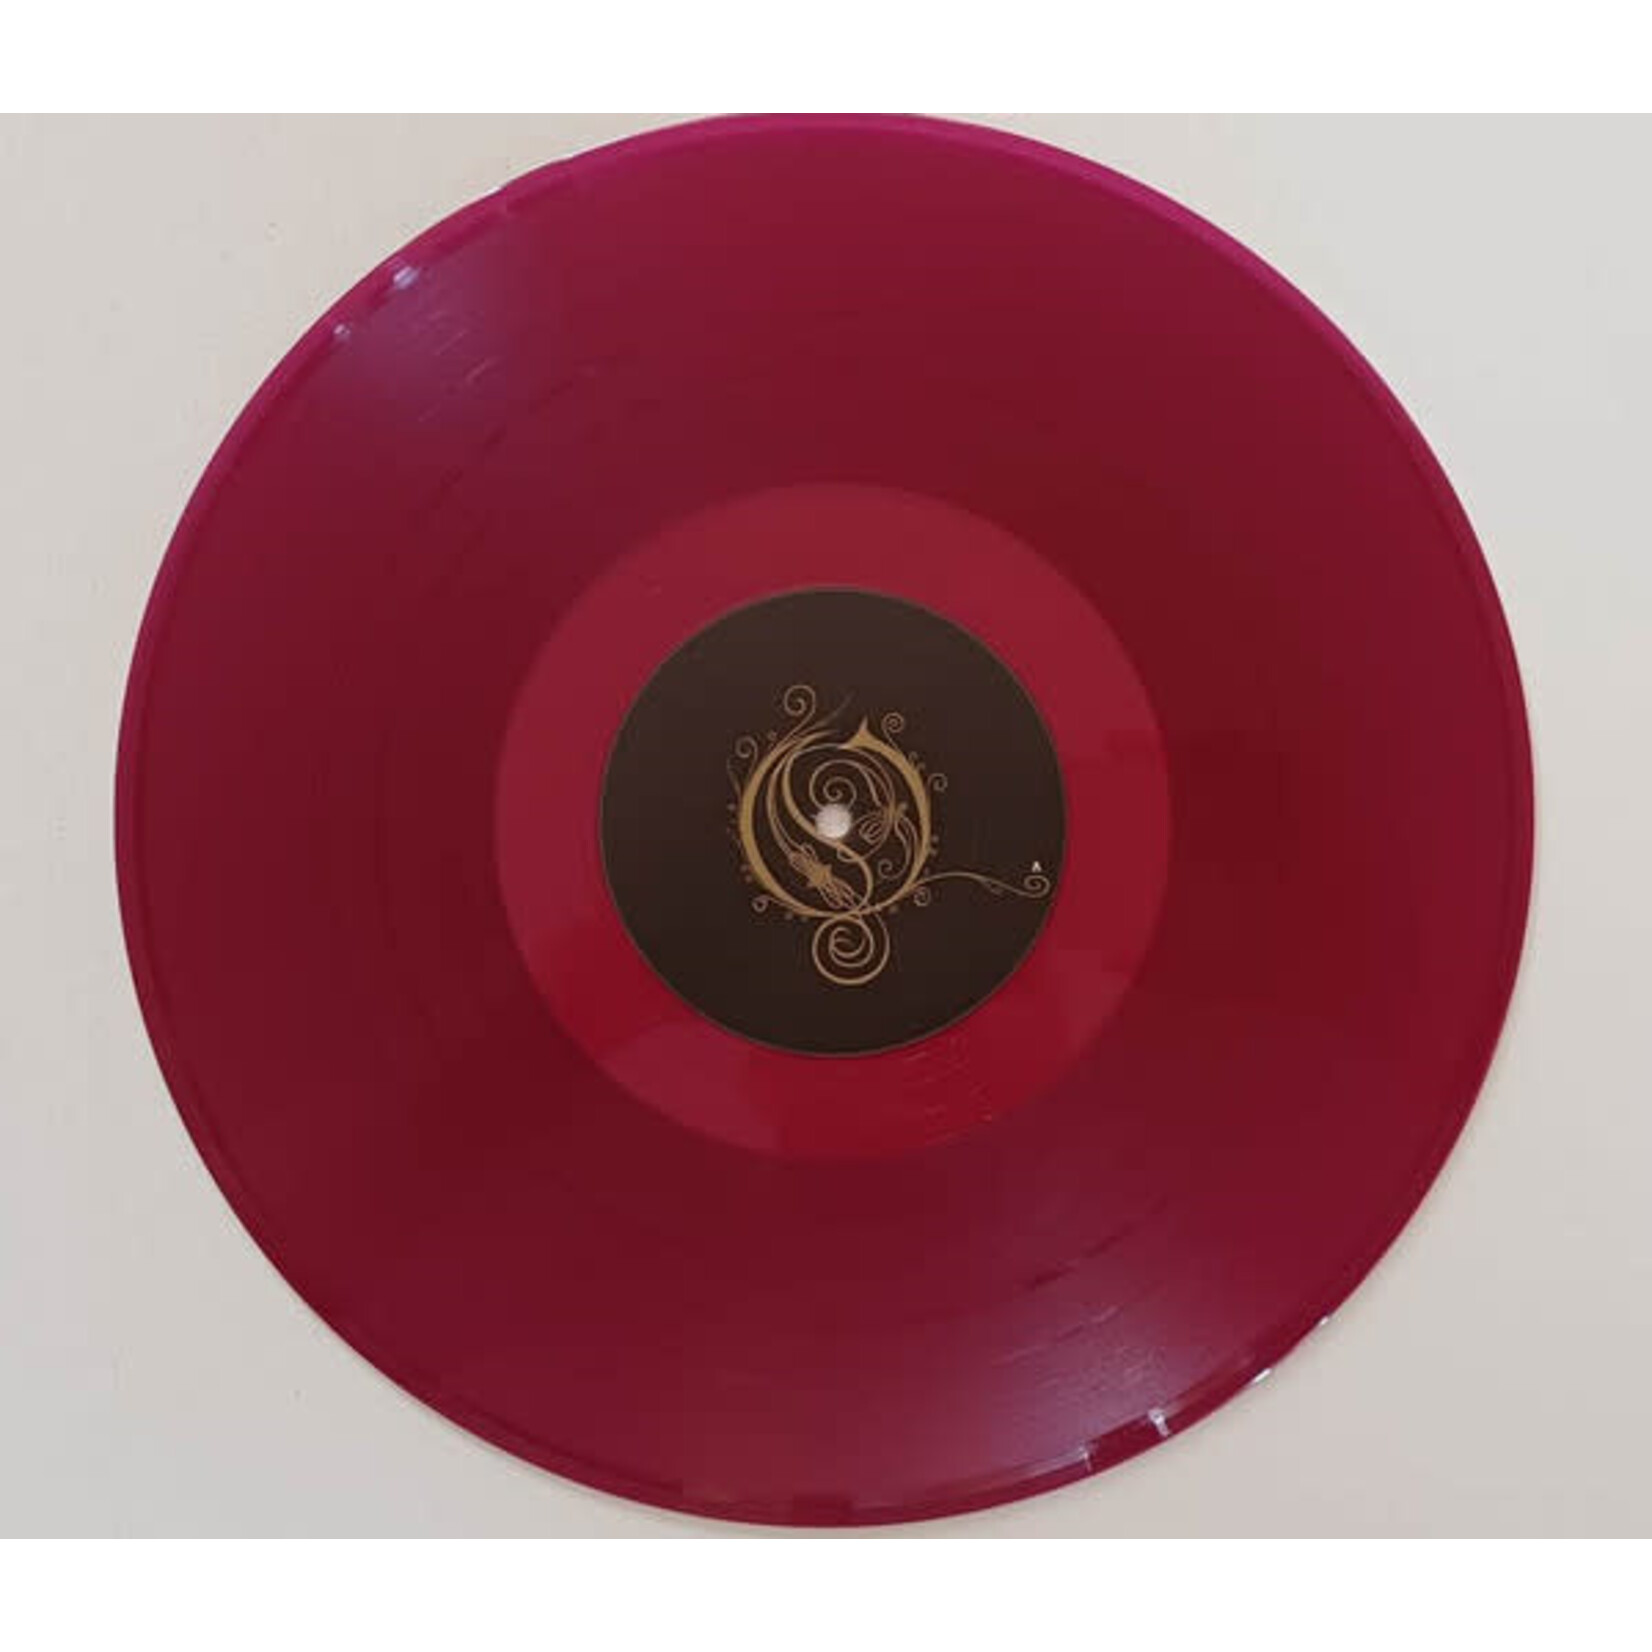 [New] Opeth: My Arms, Your Hearse (2LP, violet vinyl) [CANDLELIGHT]